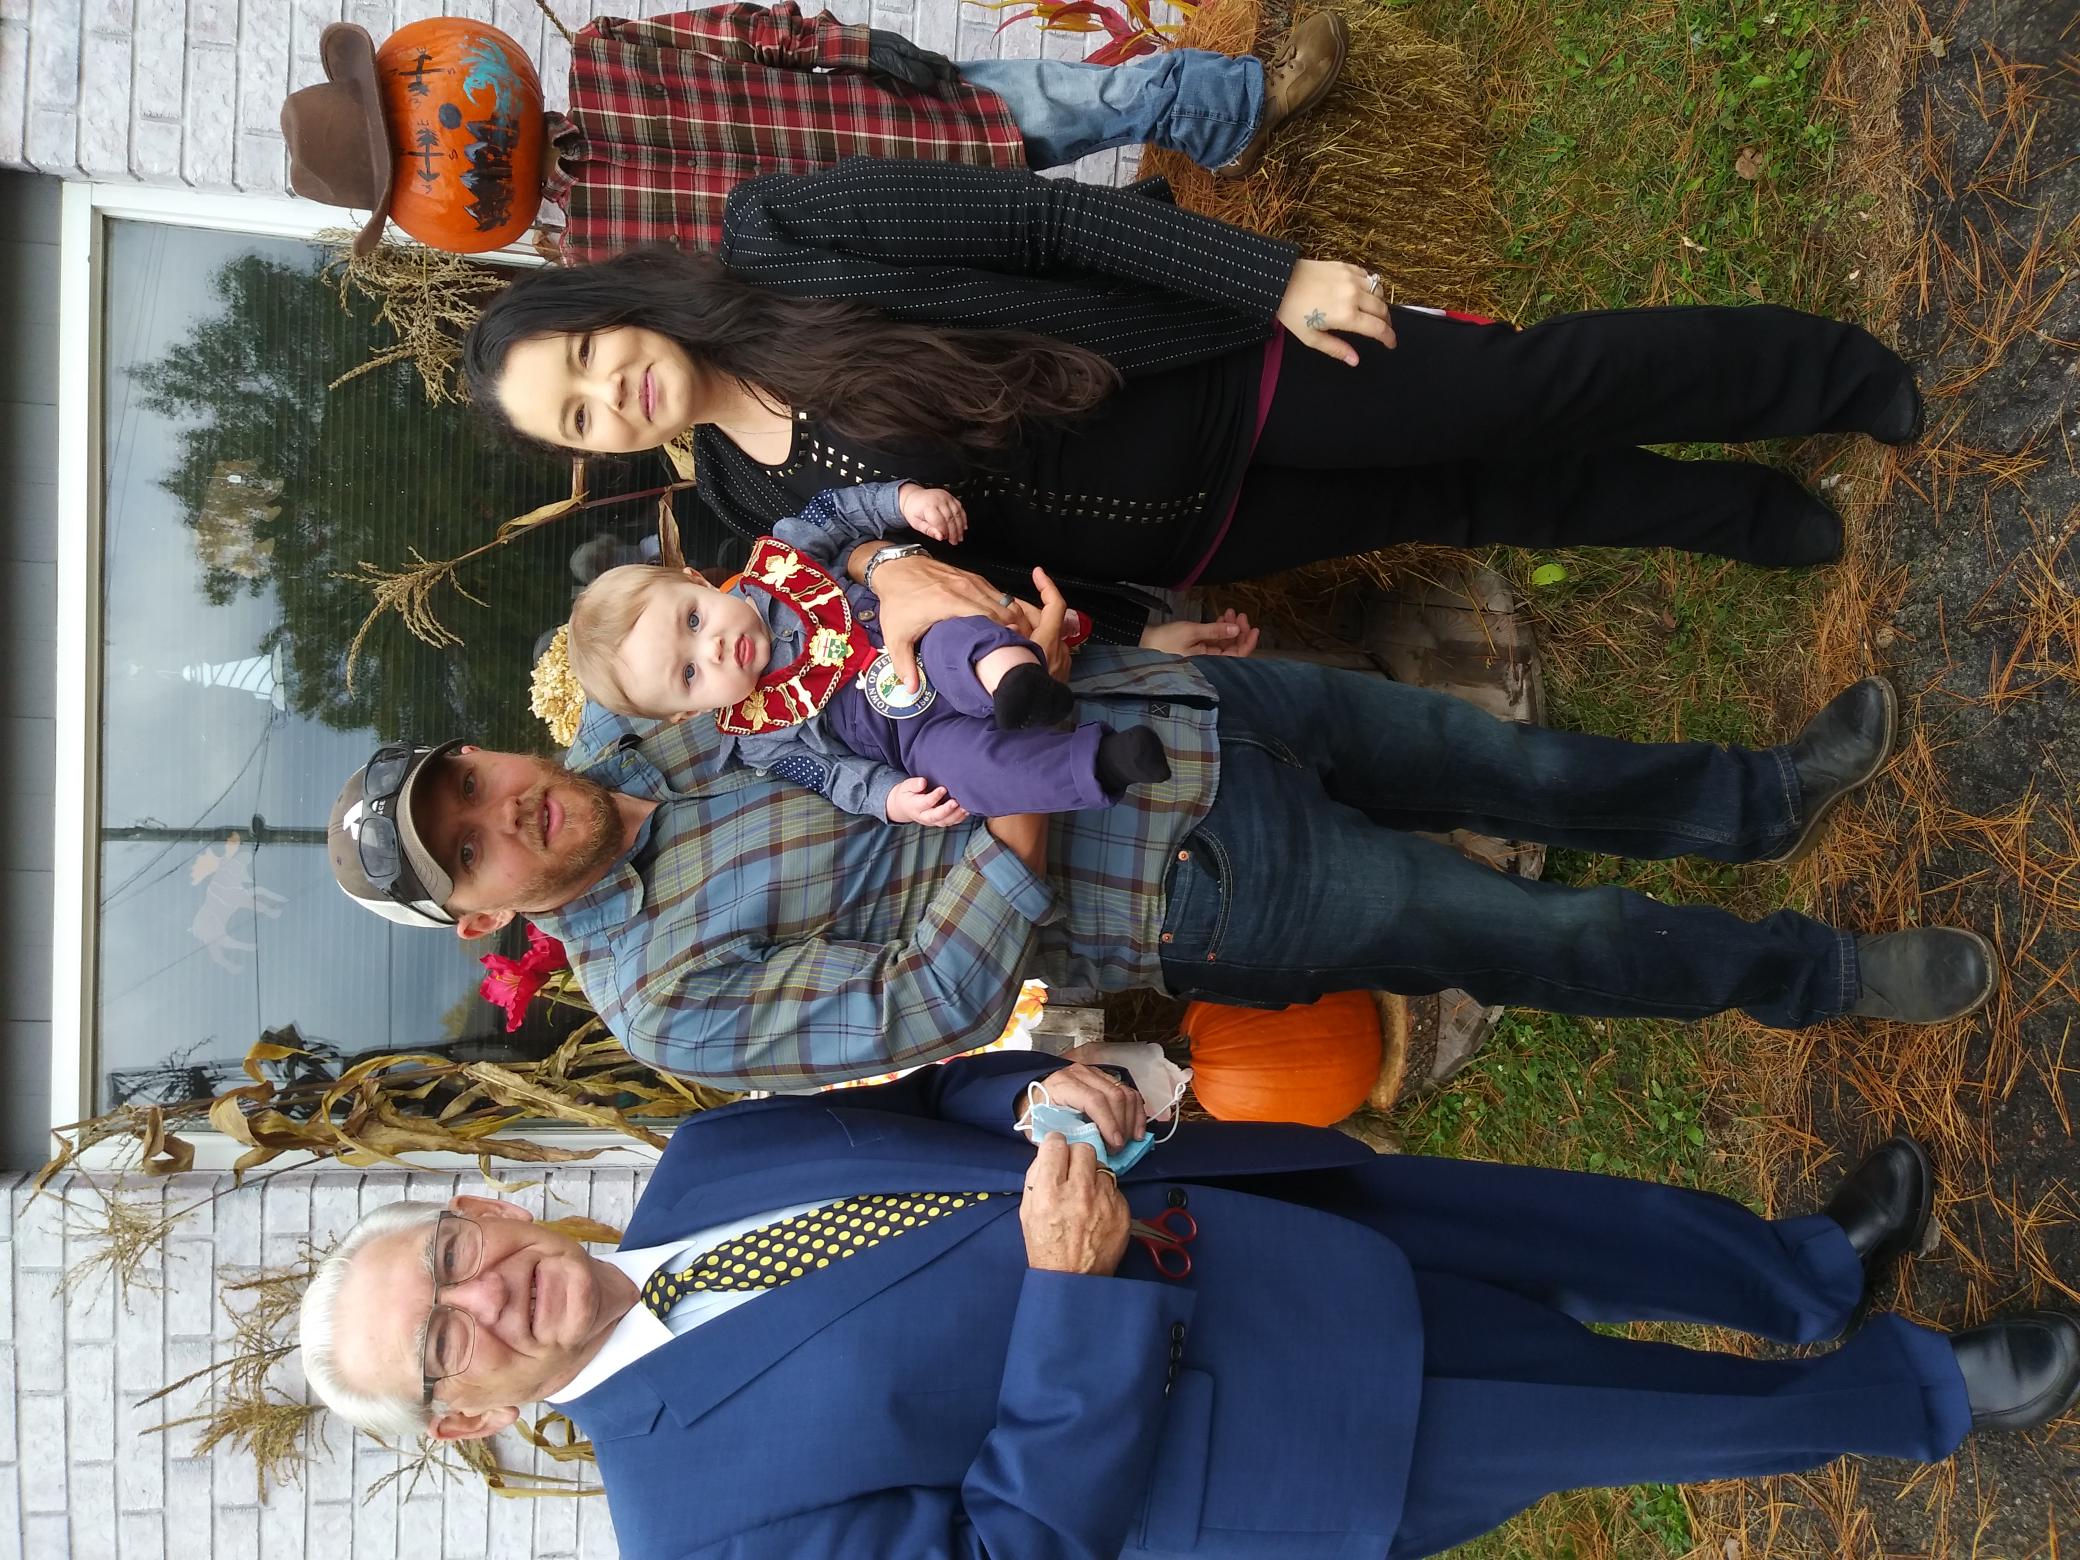 Mayor Sweet with Chelsea and family of Valley Creations